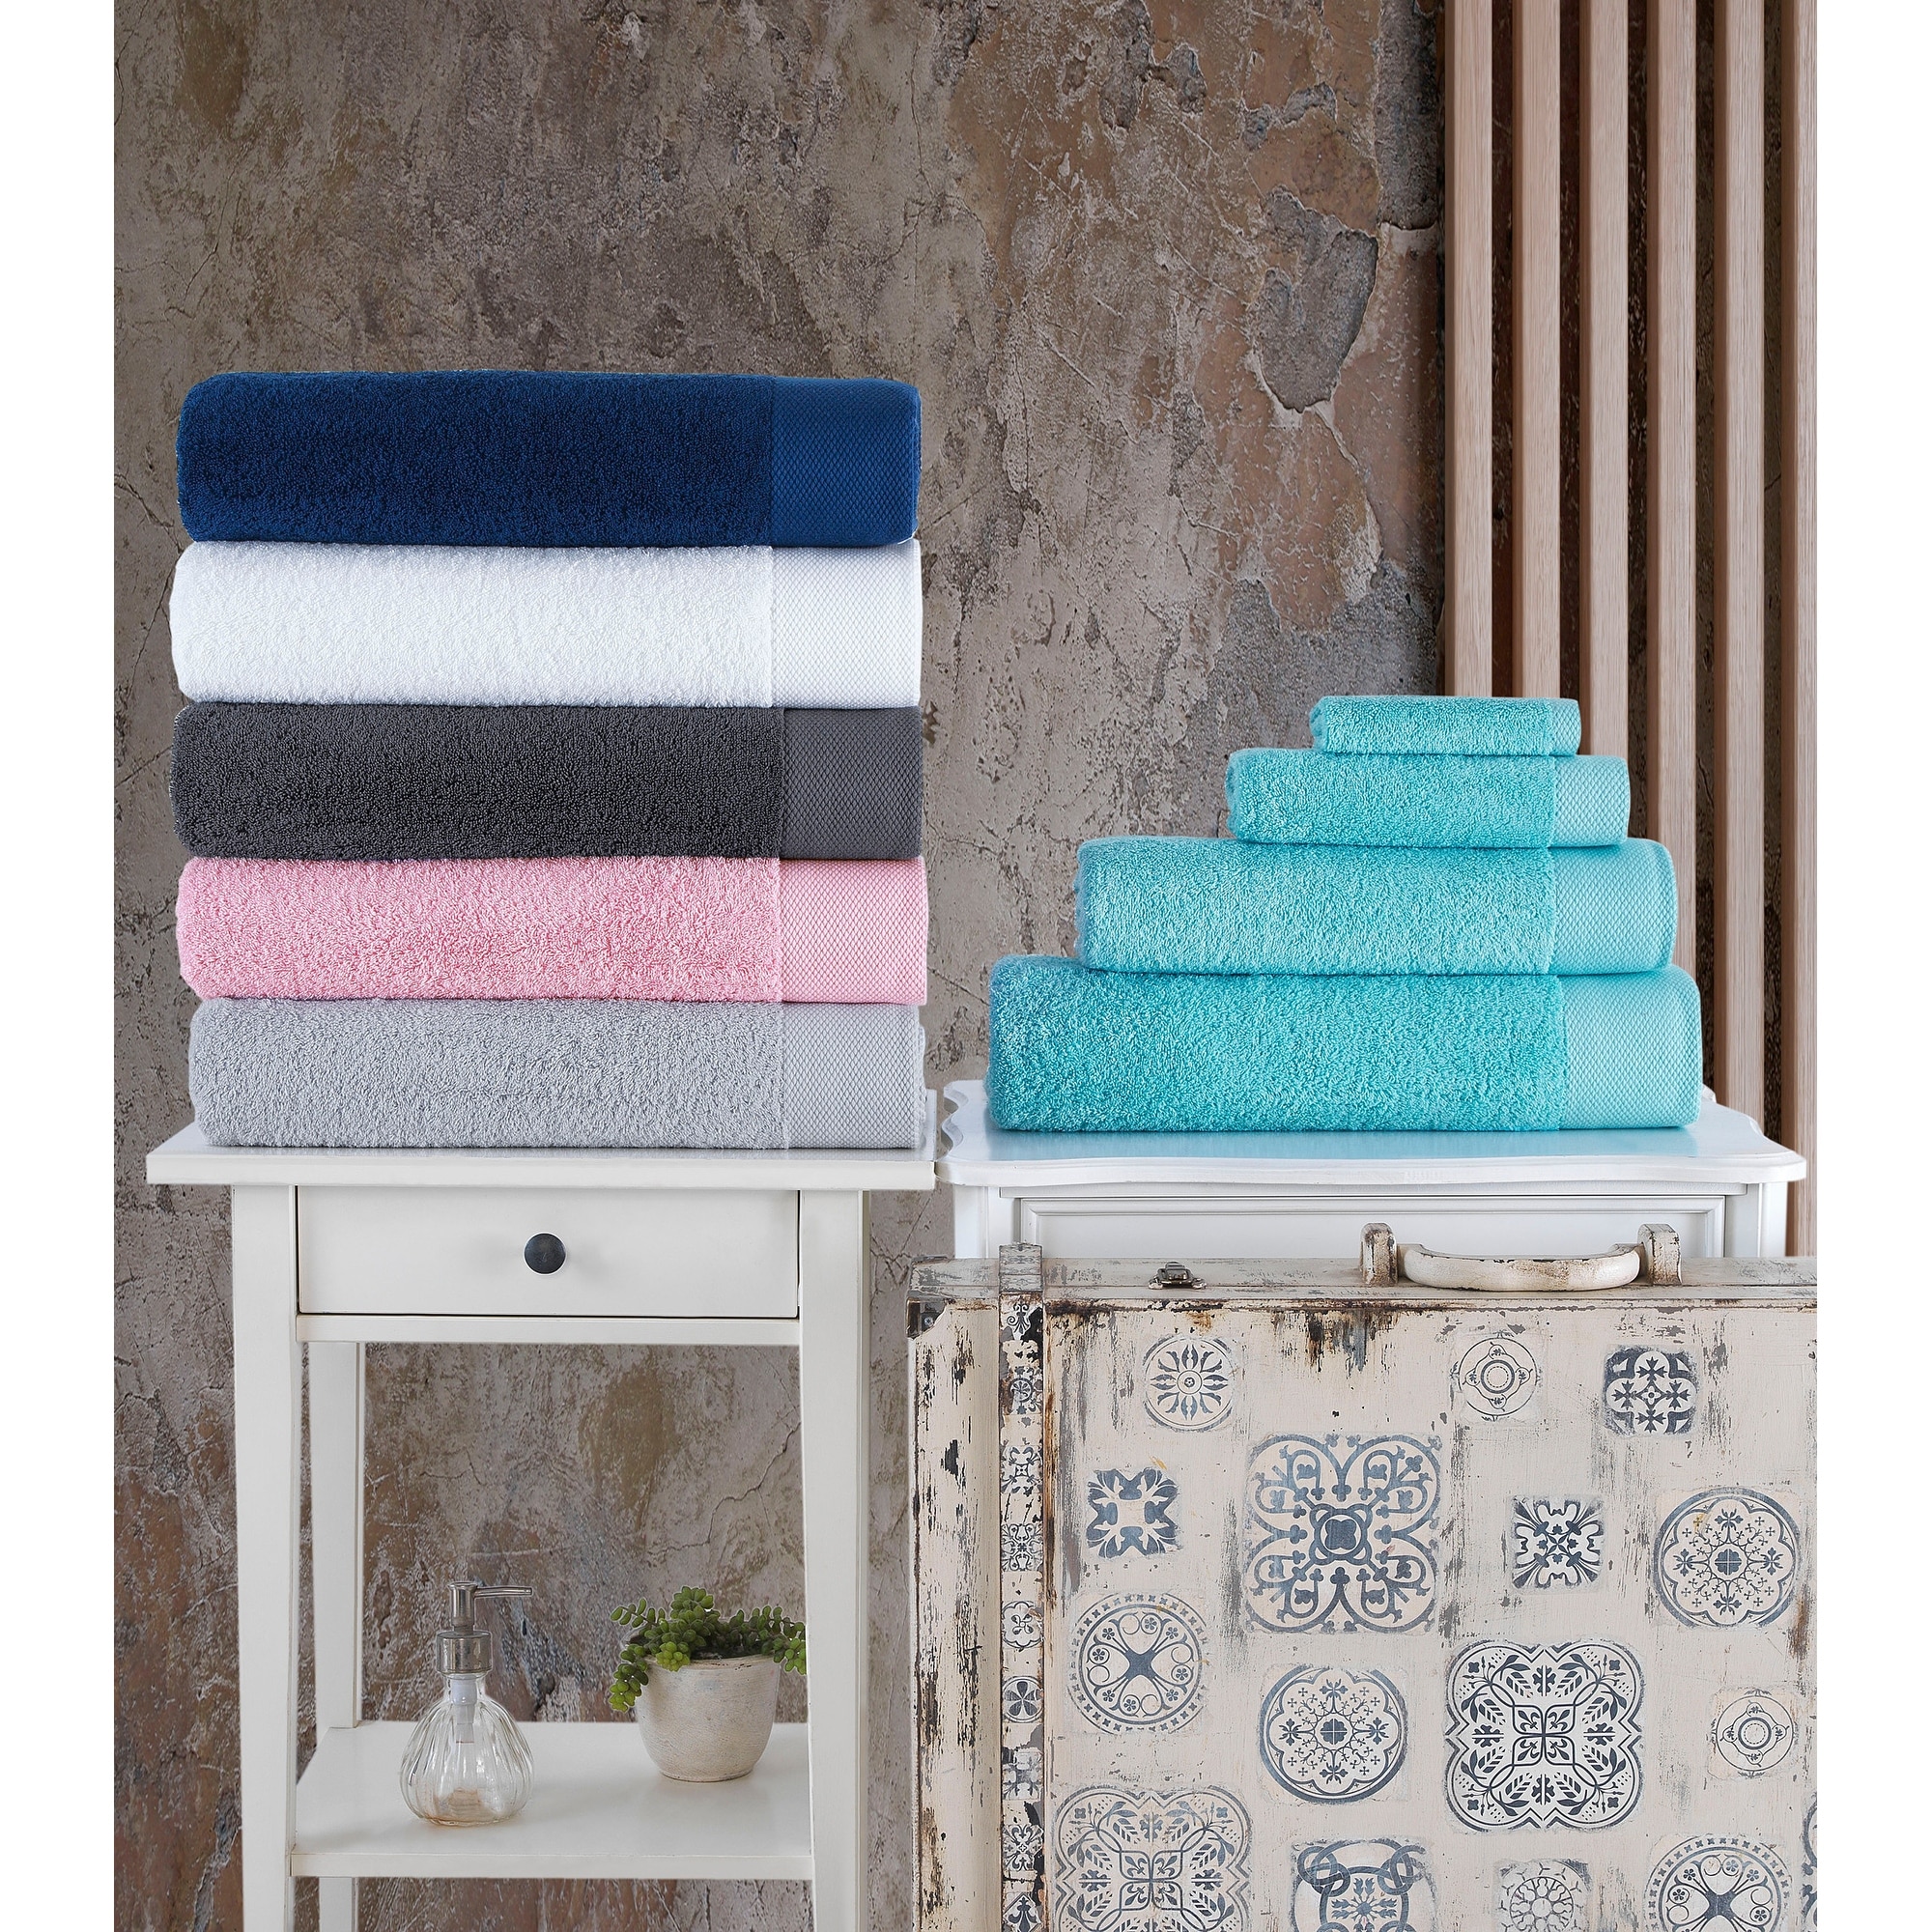 https://ak1.ostkcdn.com/images/products/is/images/direct/81f1bb547c75ee04dfd1f6767e18e2f11dd7970c/Brooks-Brothers-Solid-Signature-4-pcs-Wash-Towels.jpg